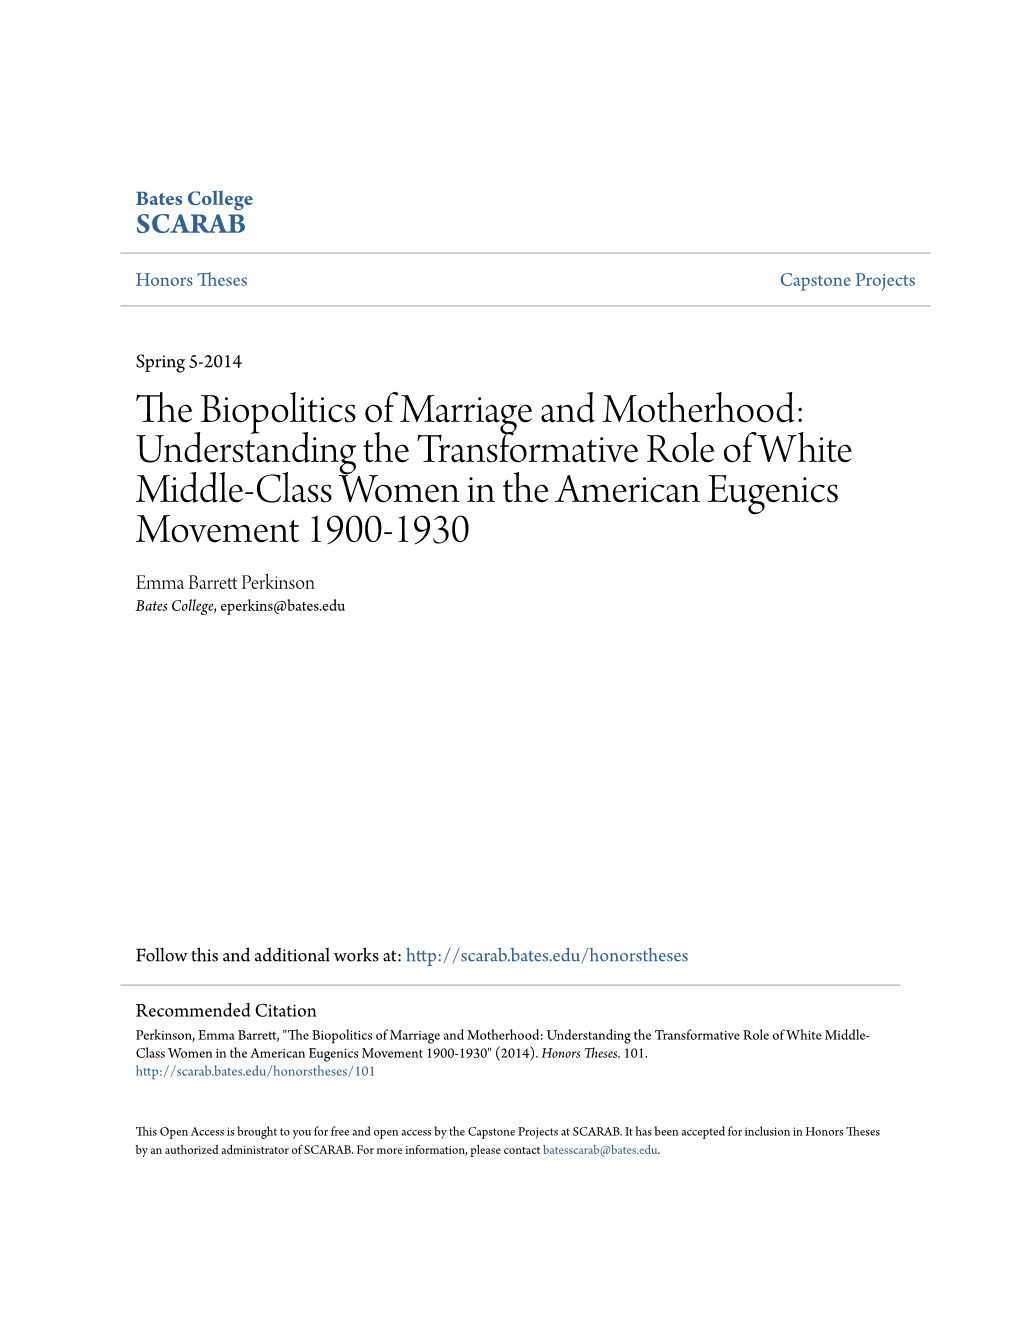 The Biopolitics of Marriage and Motherhood: Understanding the Transformative Role of White Middle-Class Women in the American Eugenics Movement 1900-1930